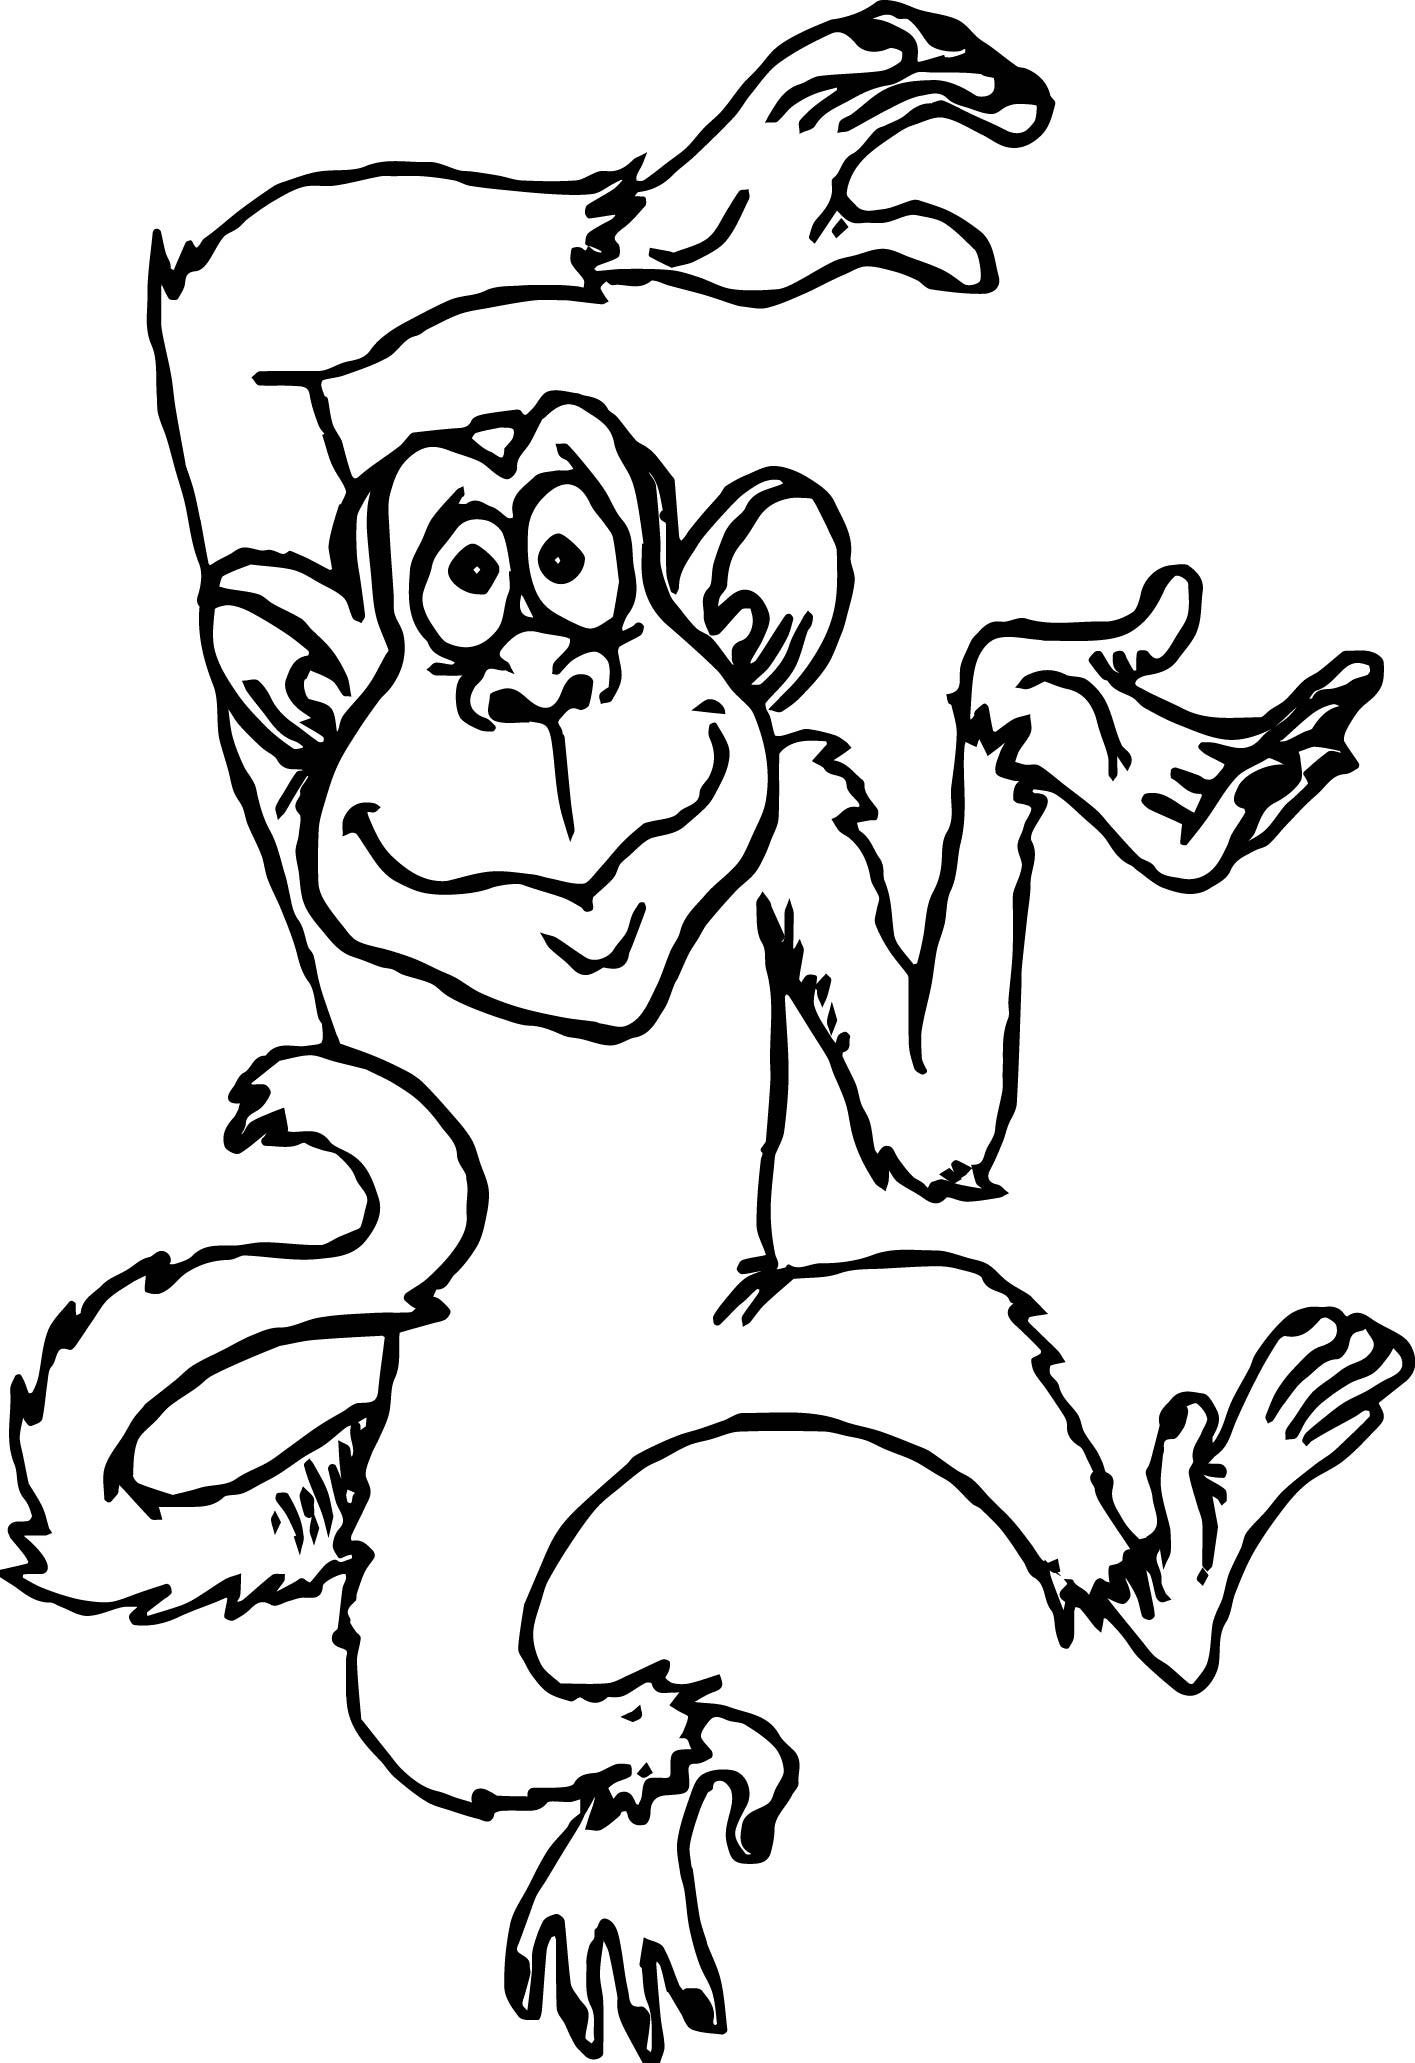 Coloring Pages Of Monkeys Coloring Pages Of Cute Monkeys At Getdrawings Free For